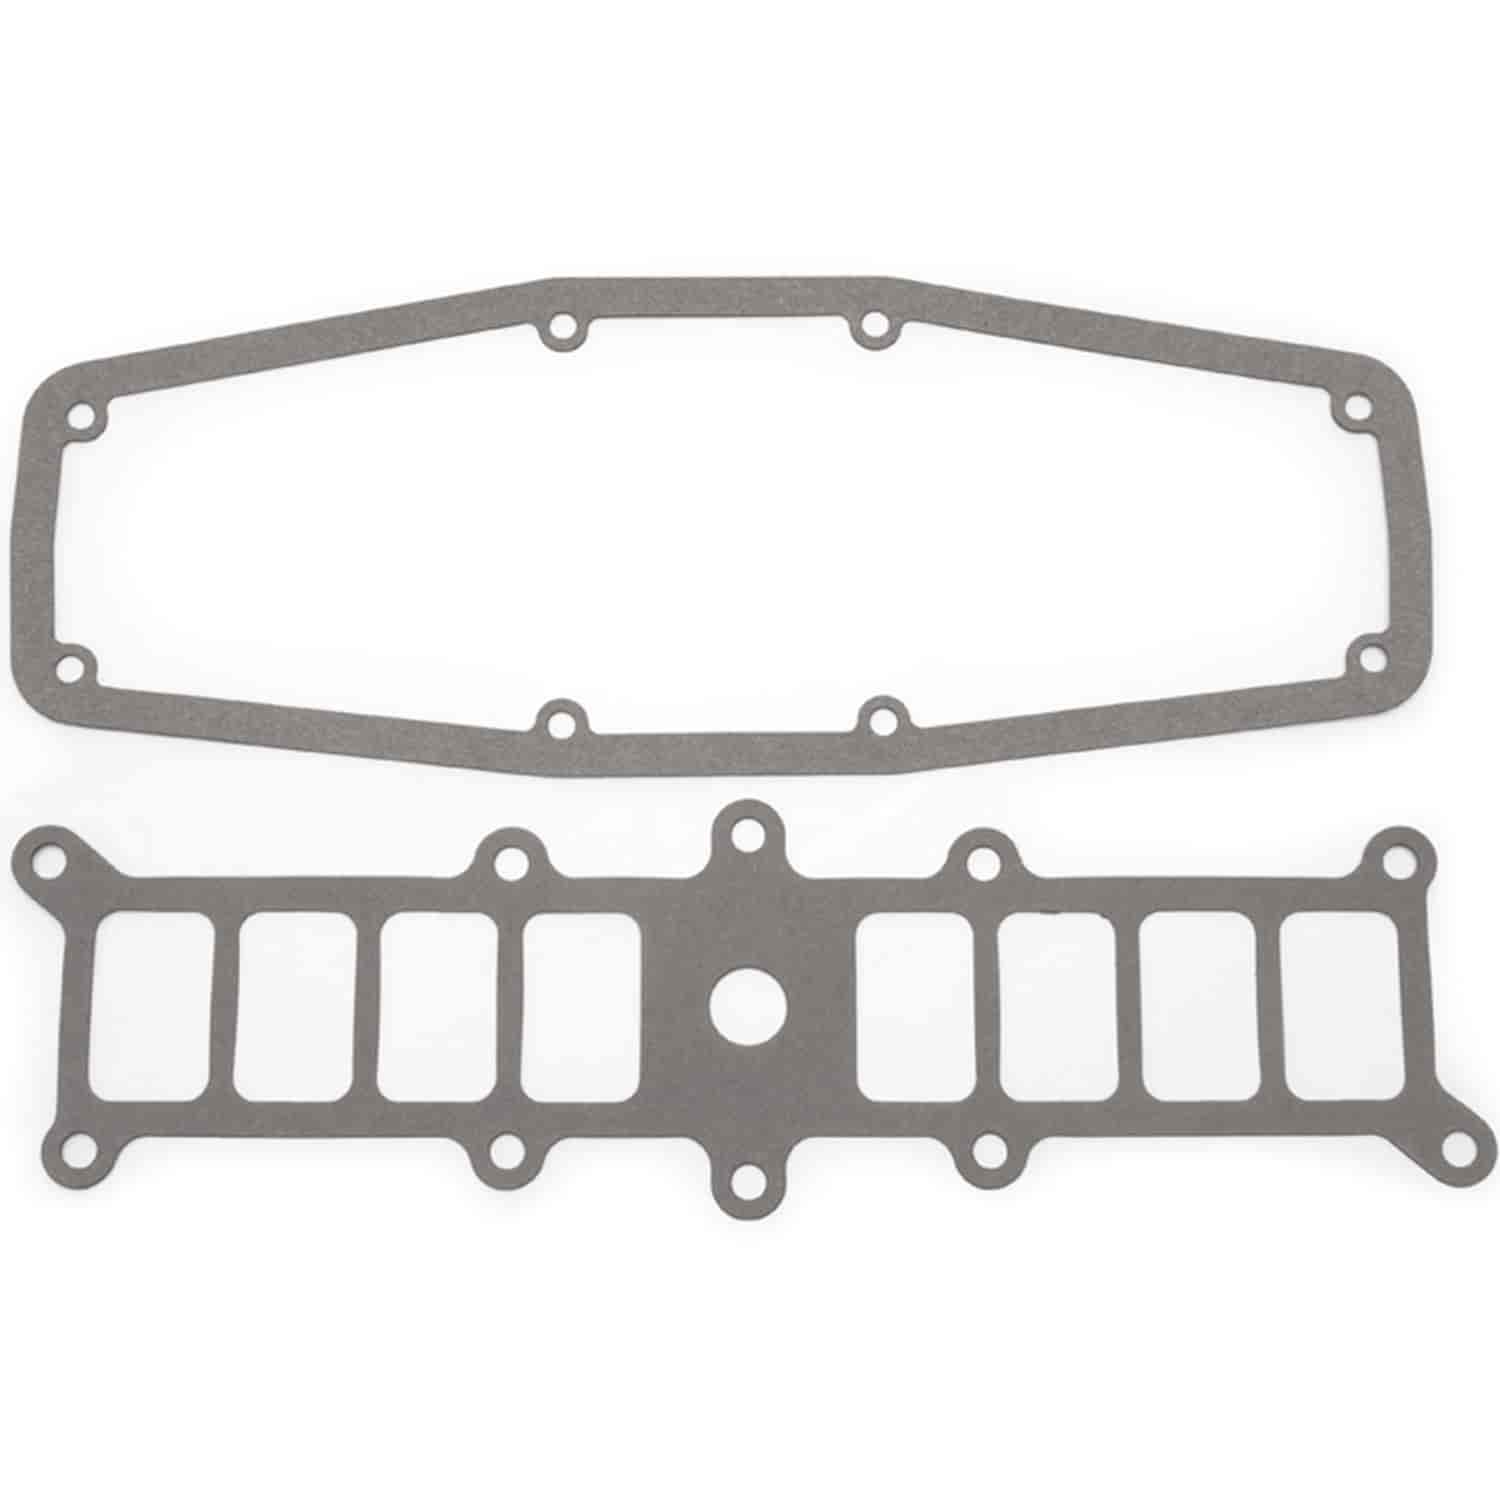 Performer RPM Intake Manifold Gaskets for 1986-1995 Ford 5.0L